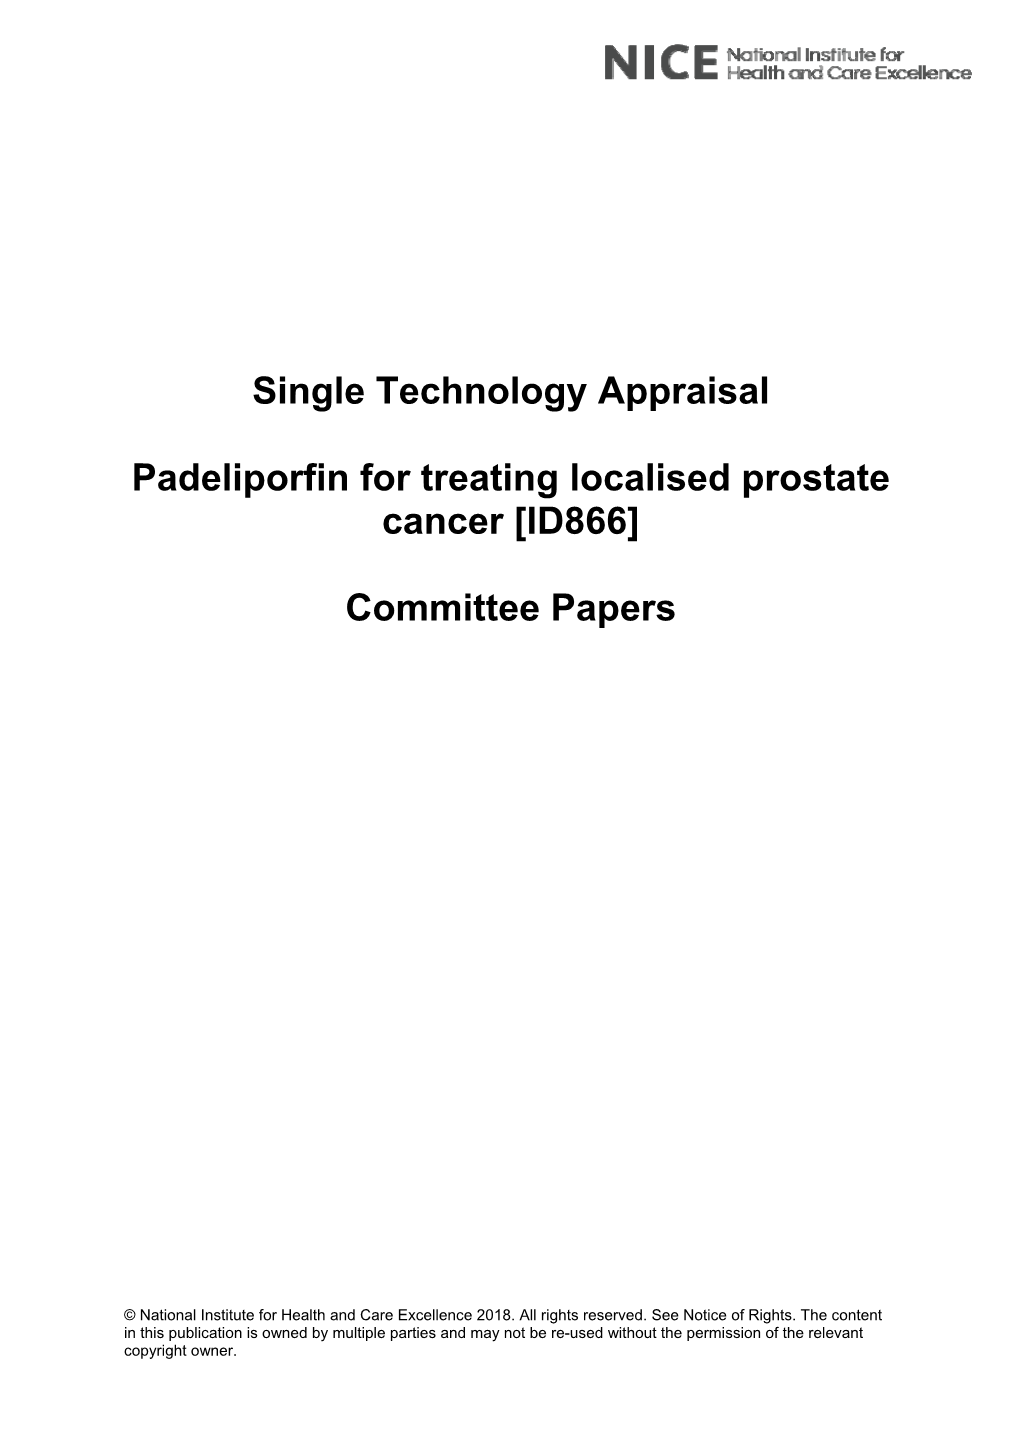 Single Technology Appraisal Padeliporfin for Treating Localised